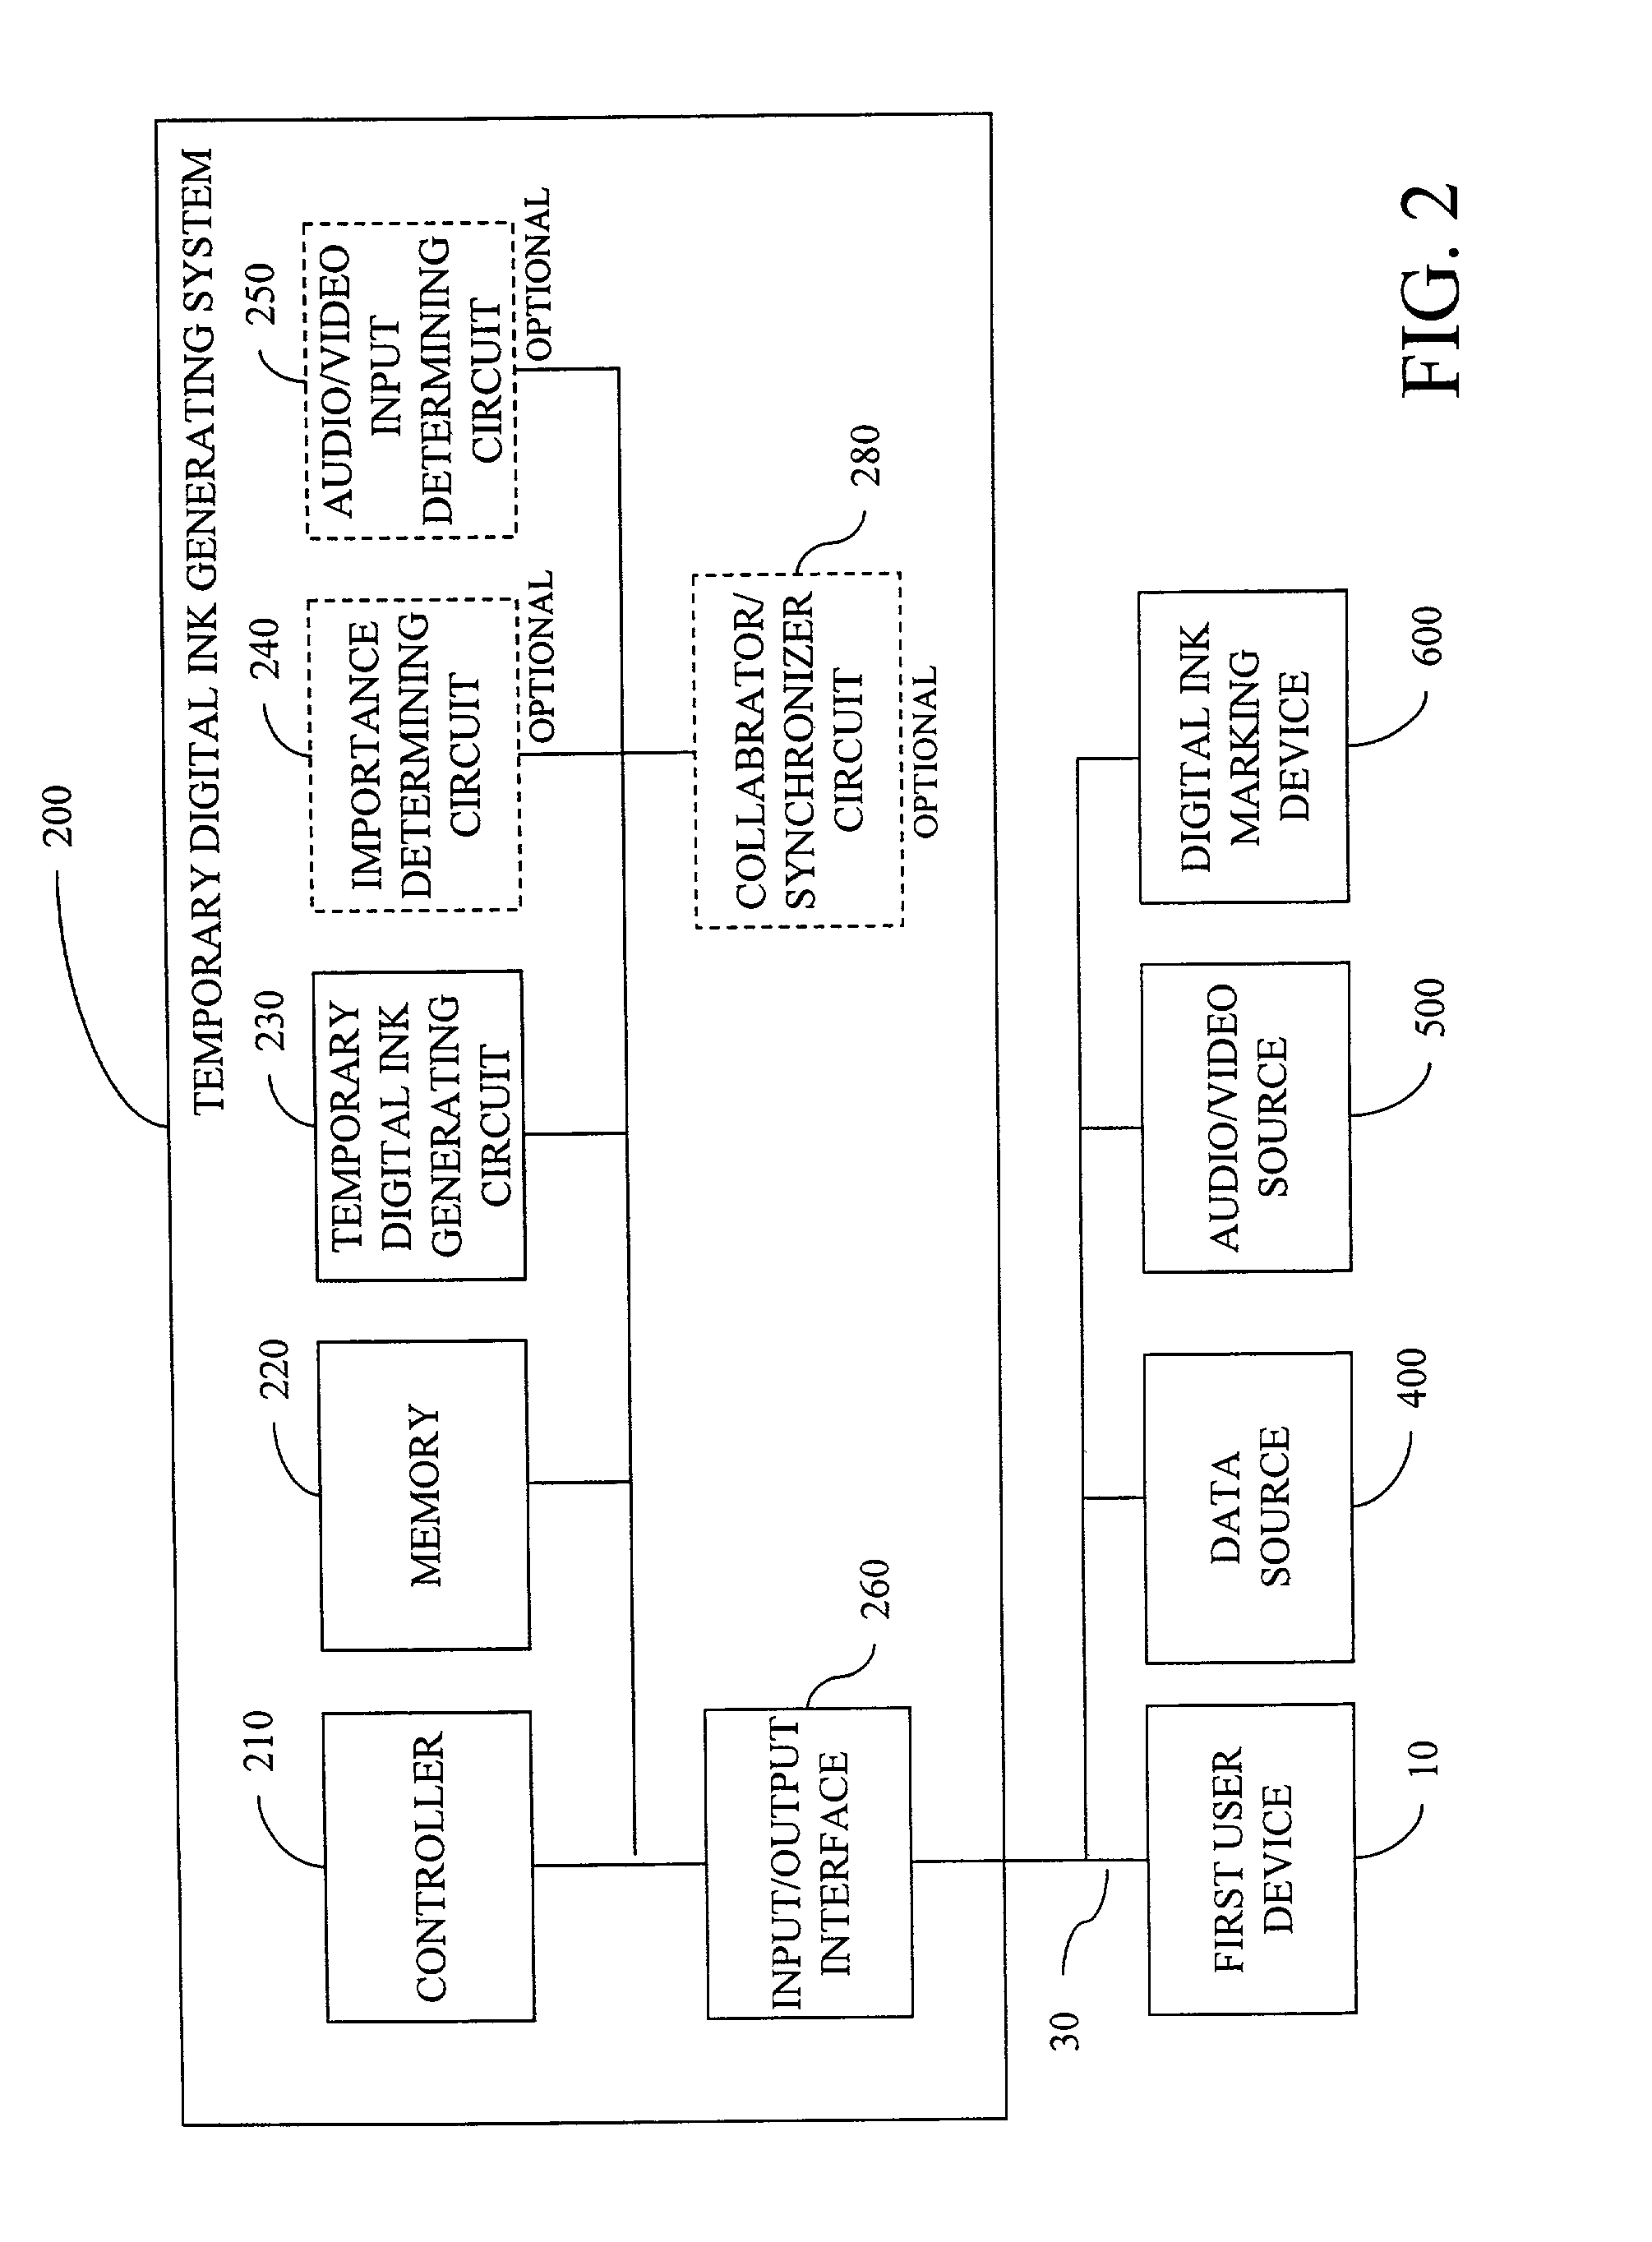 Systems and methods for generating and controlling temporary digital ink